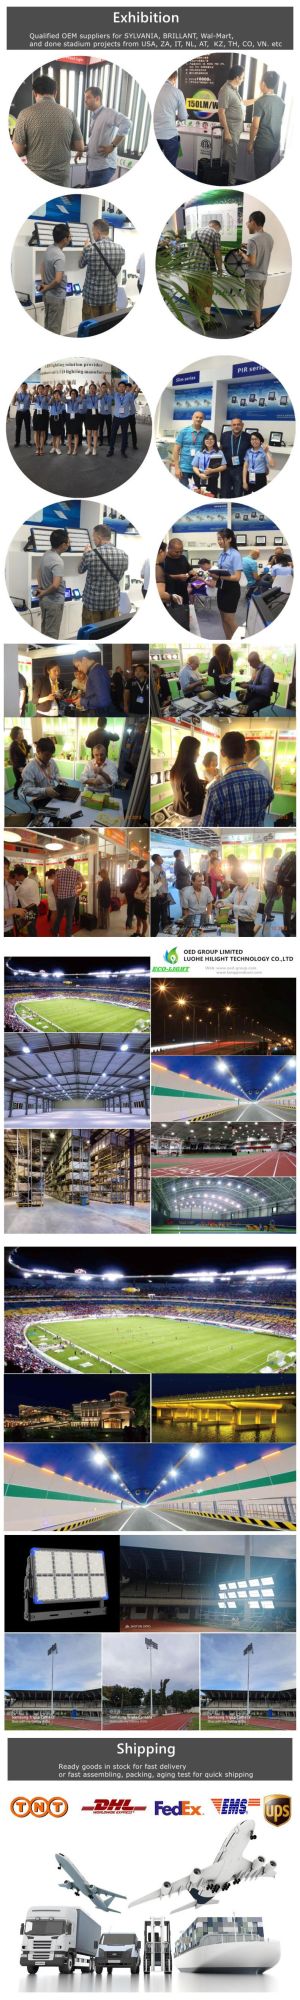 China Factory Cheap Price IP66 Waterproof 100W RGB LED Floodlight with Remote Controller